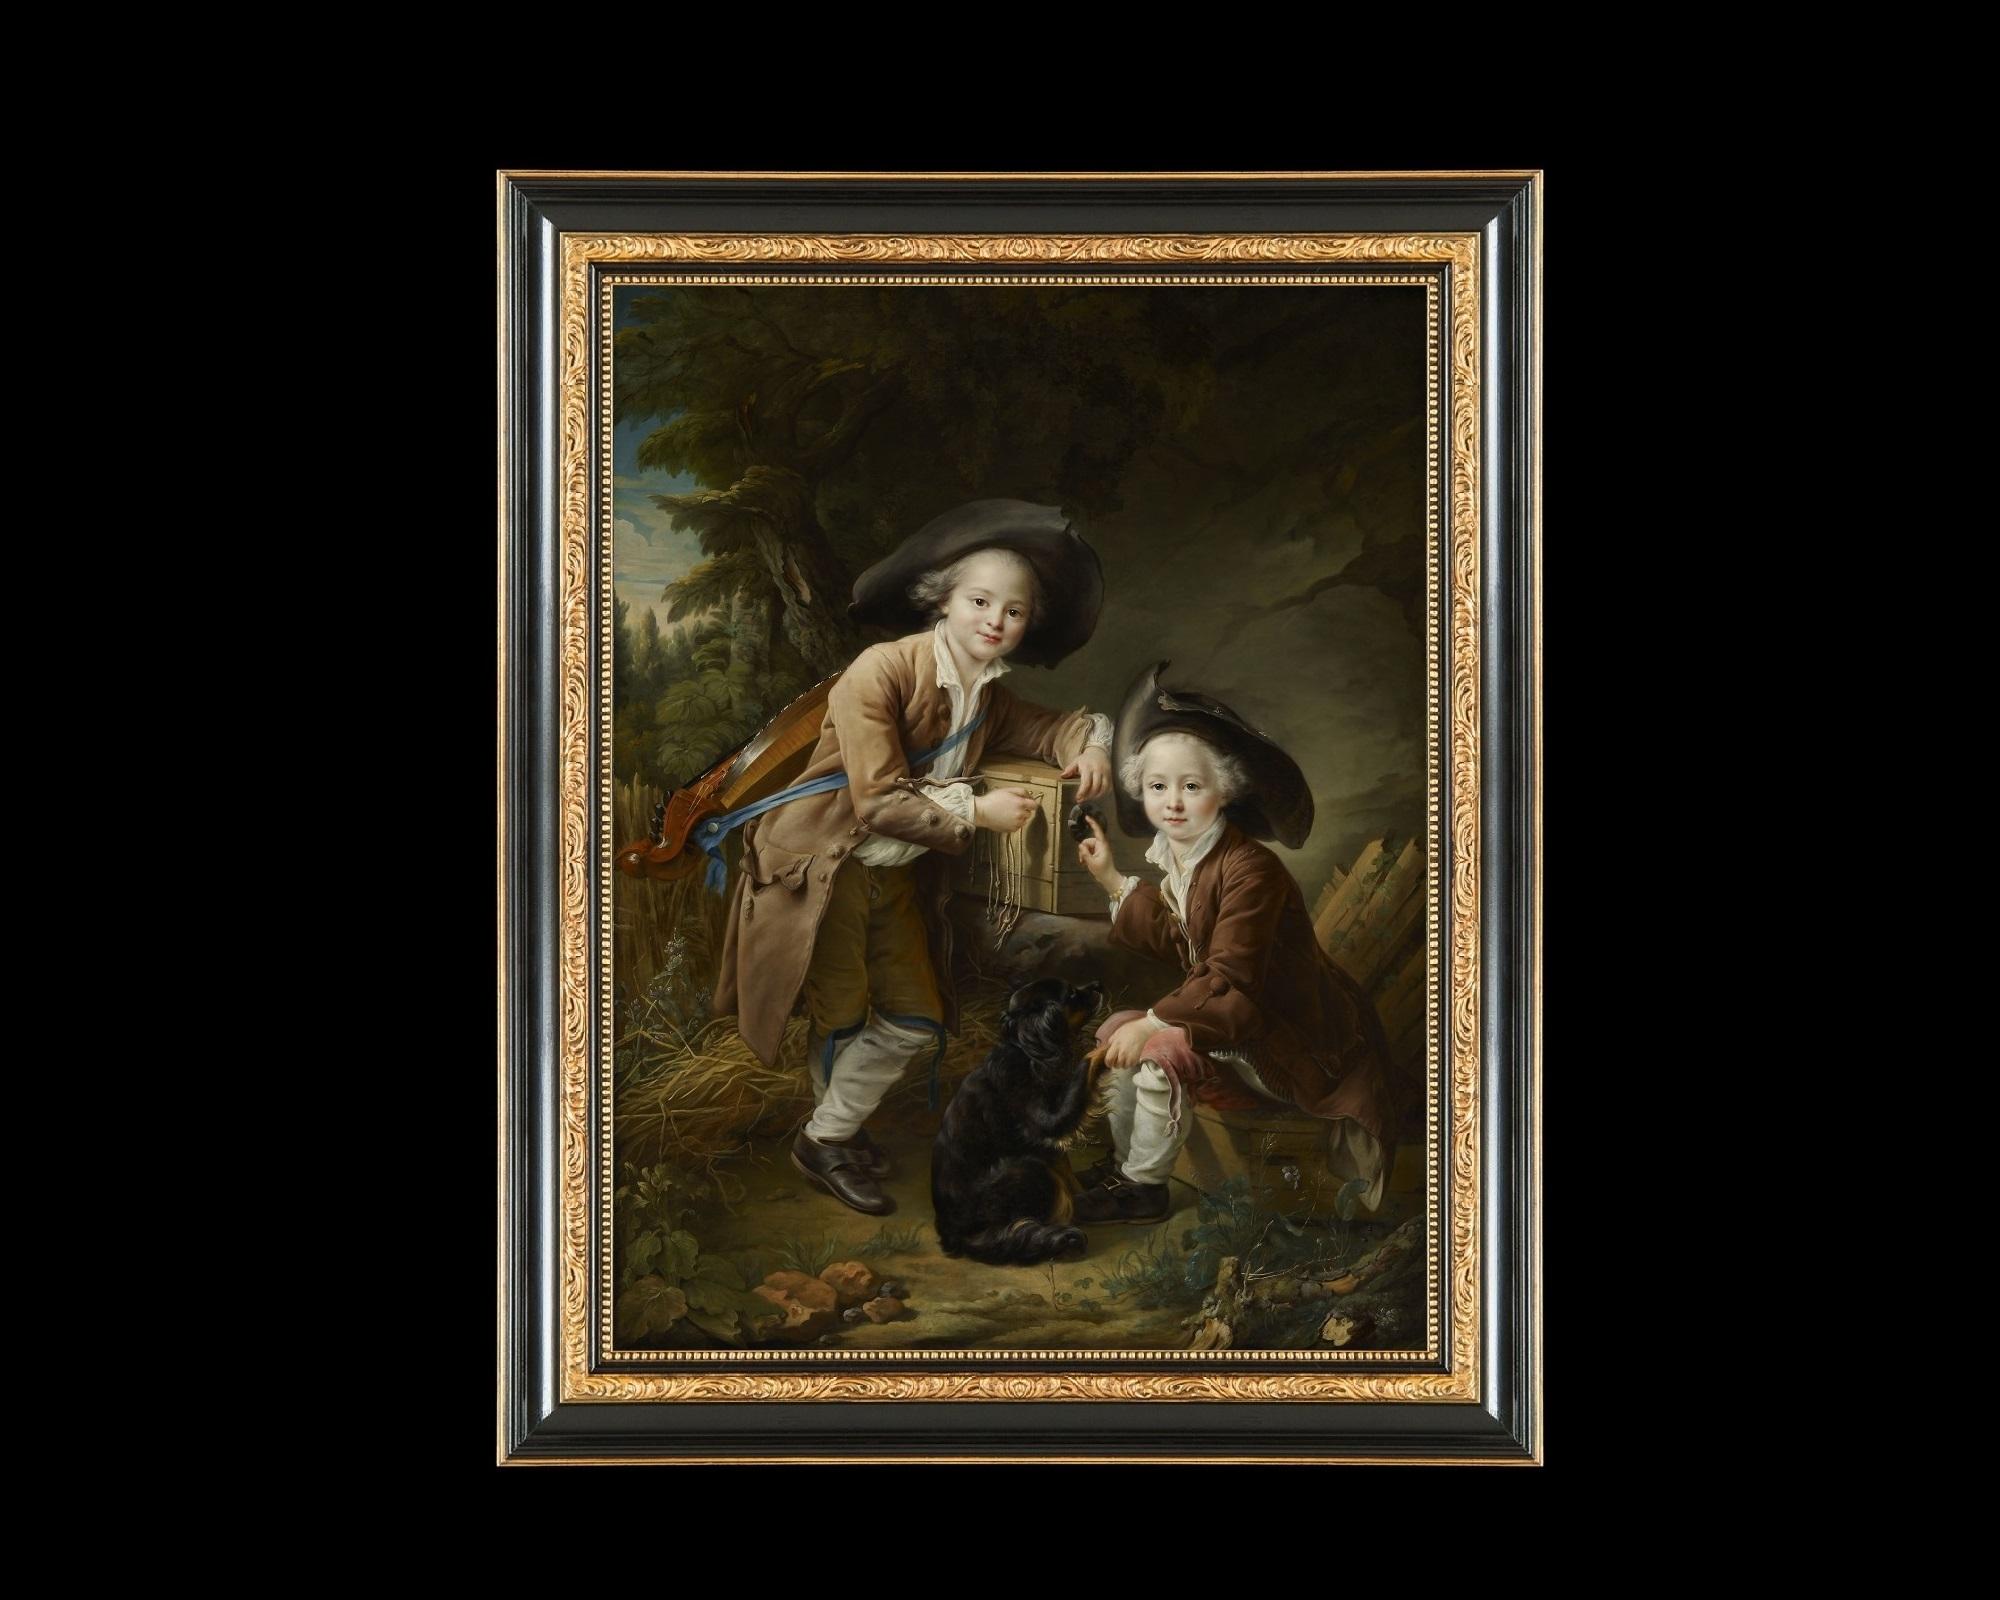 This large, Fine Art Masterpiece is a faithful yet nuanced reproduction of The Comte and Chevalier de Choiseul as 